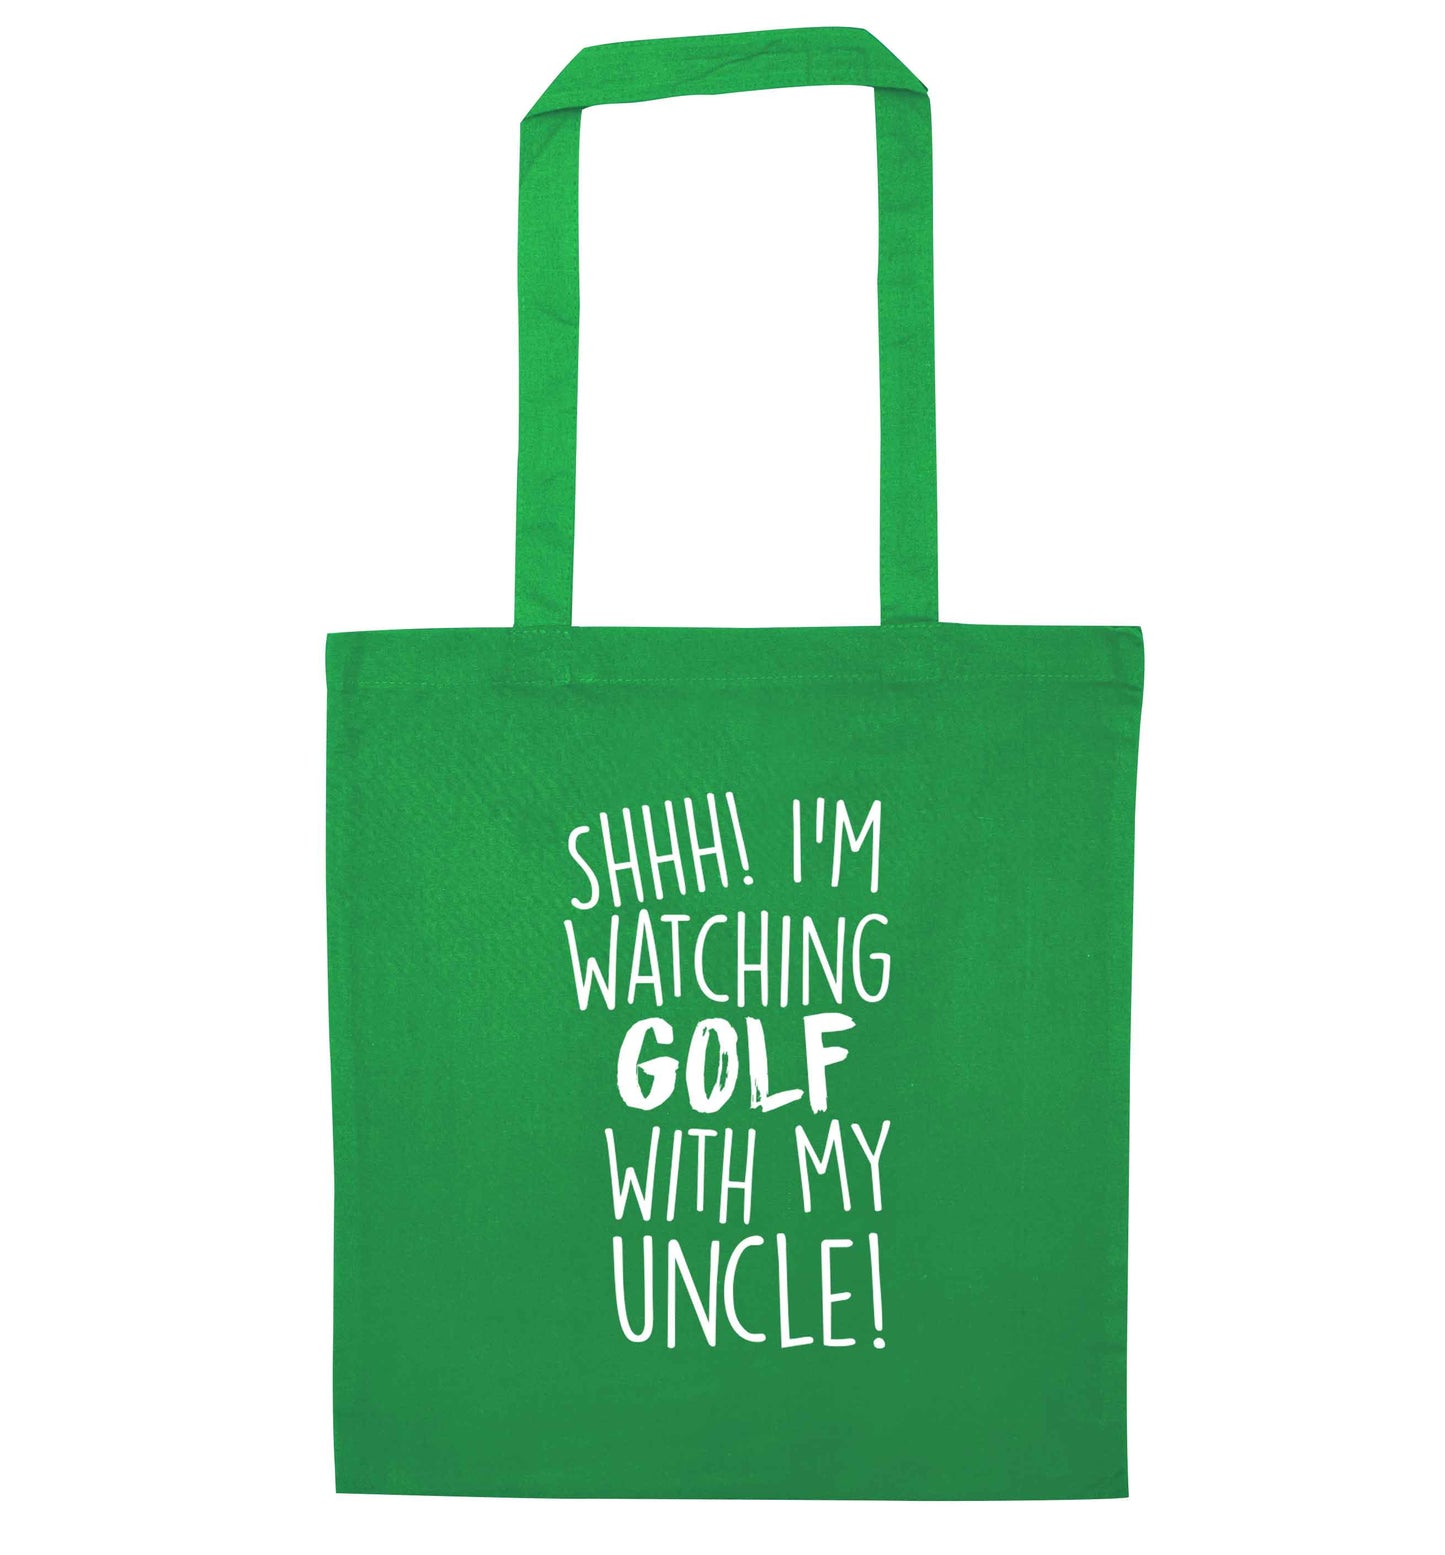 Shh I'm watching golf with my uncle green tote bag